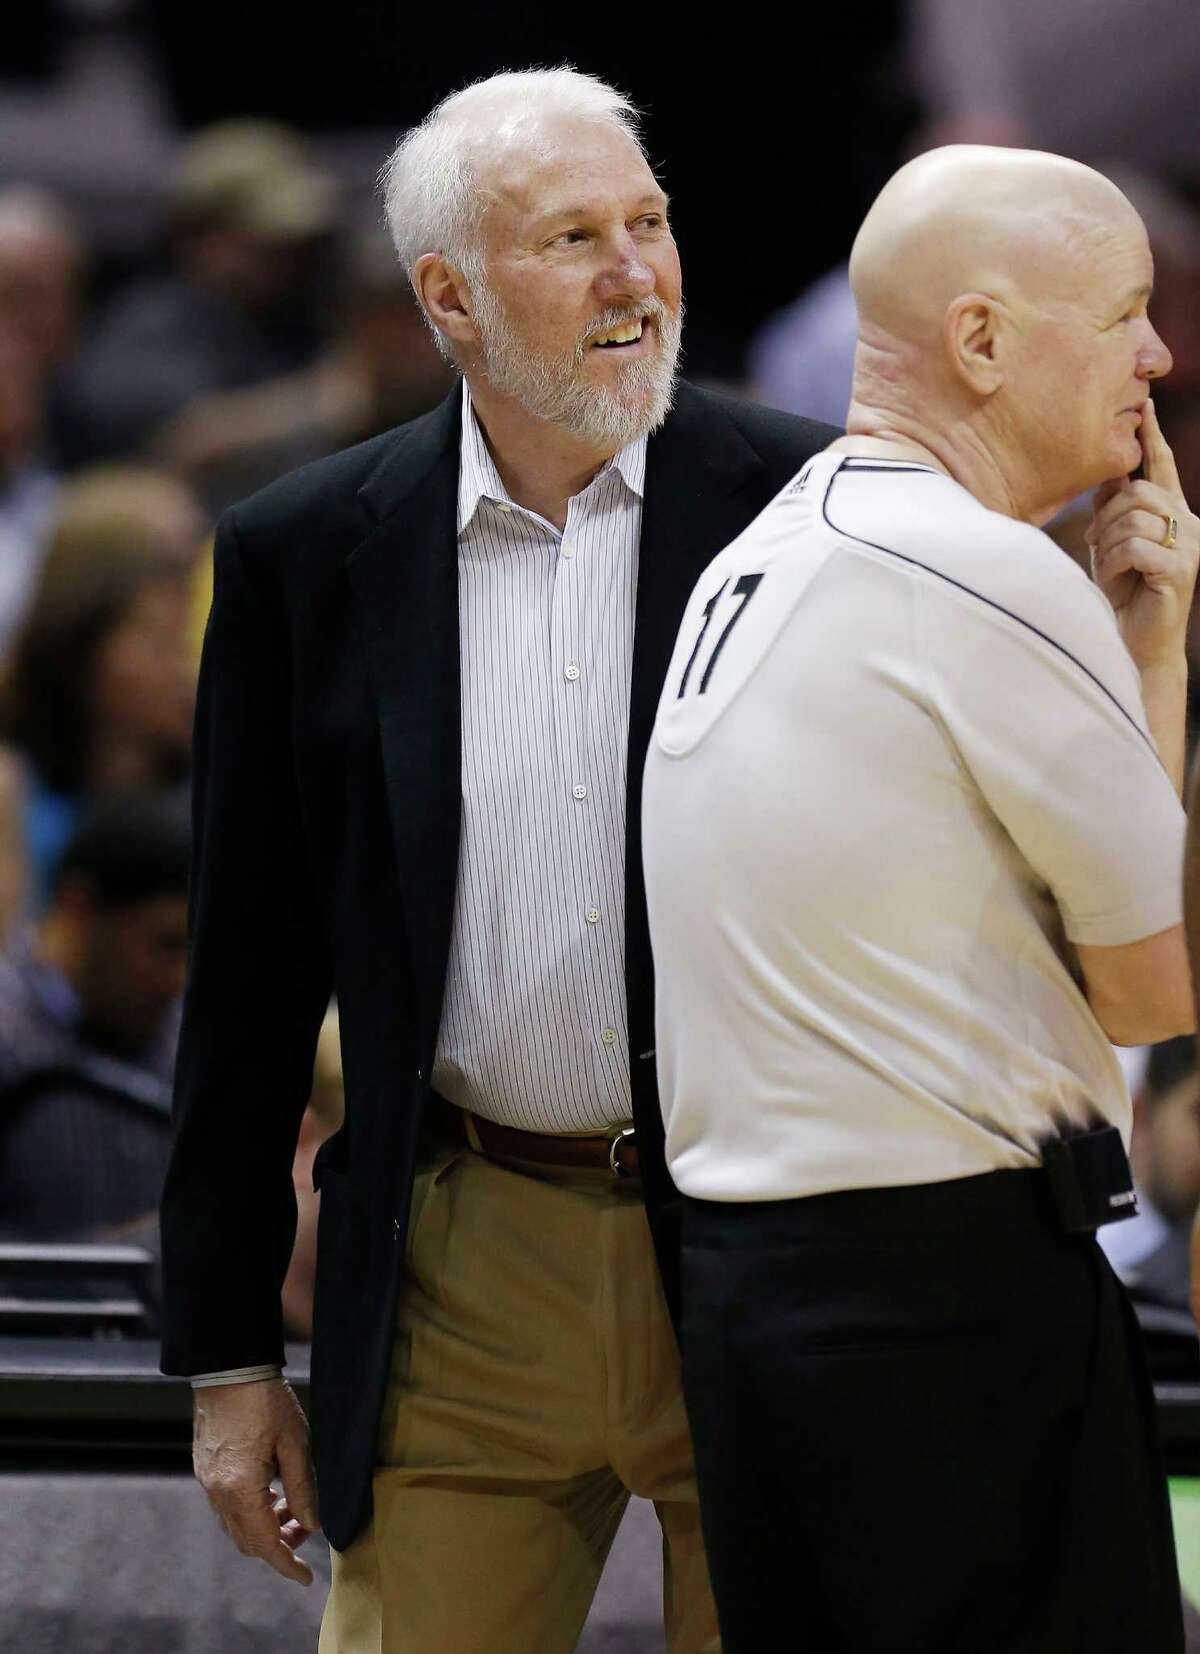 Spurs coach Gregg Popovich smiles beside official Joey Crawford (17) during the game against the Houston Rockets at the AT&T Center on Wednesday, Apr. 8, 2015. (Kin Man Hui/San Antonio Express-News)